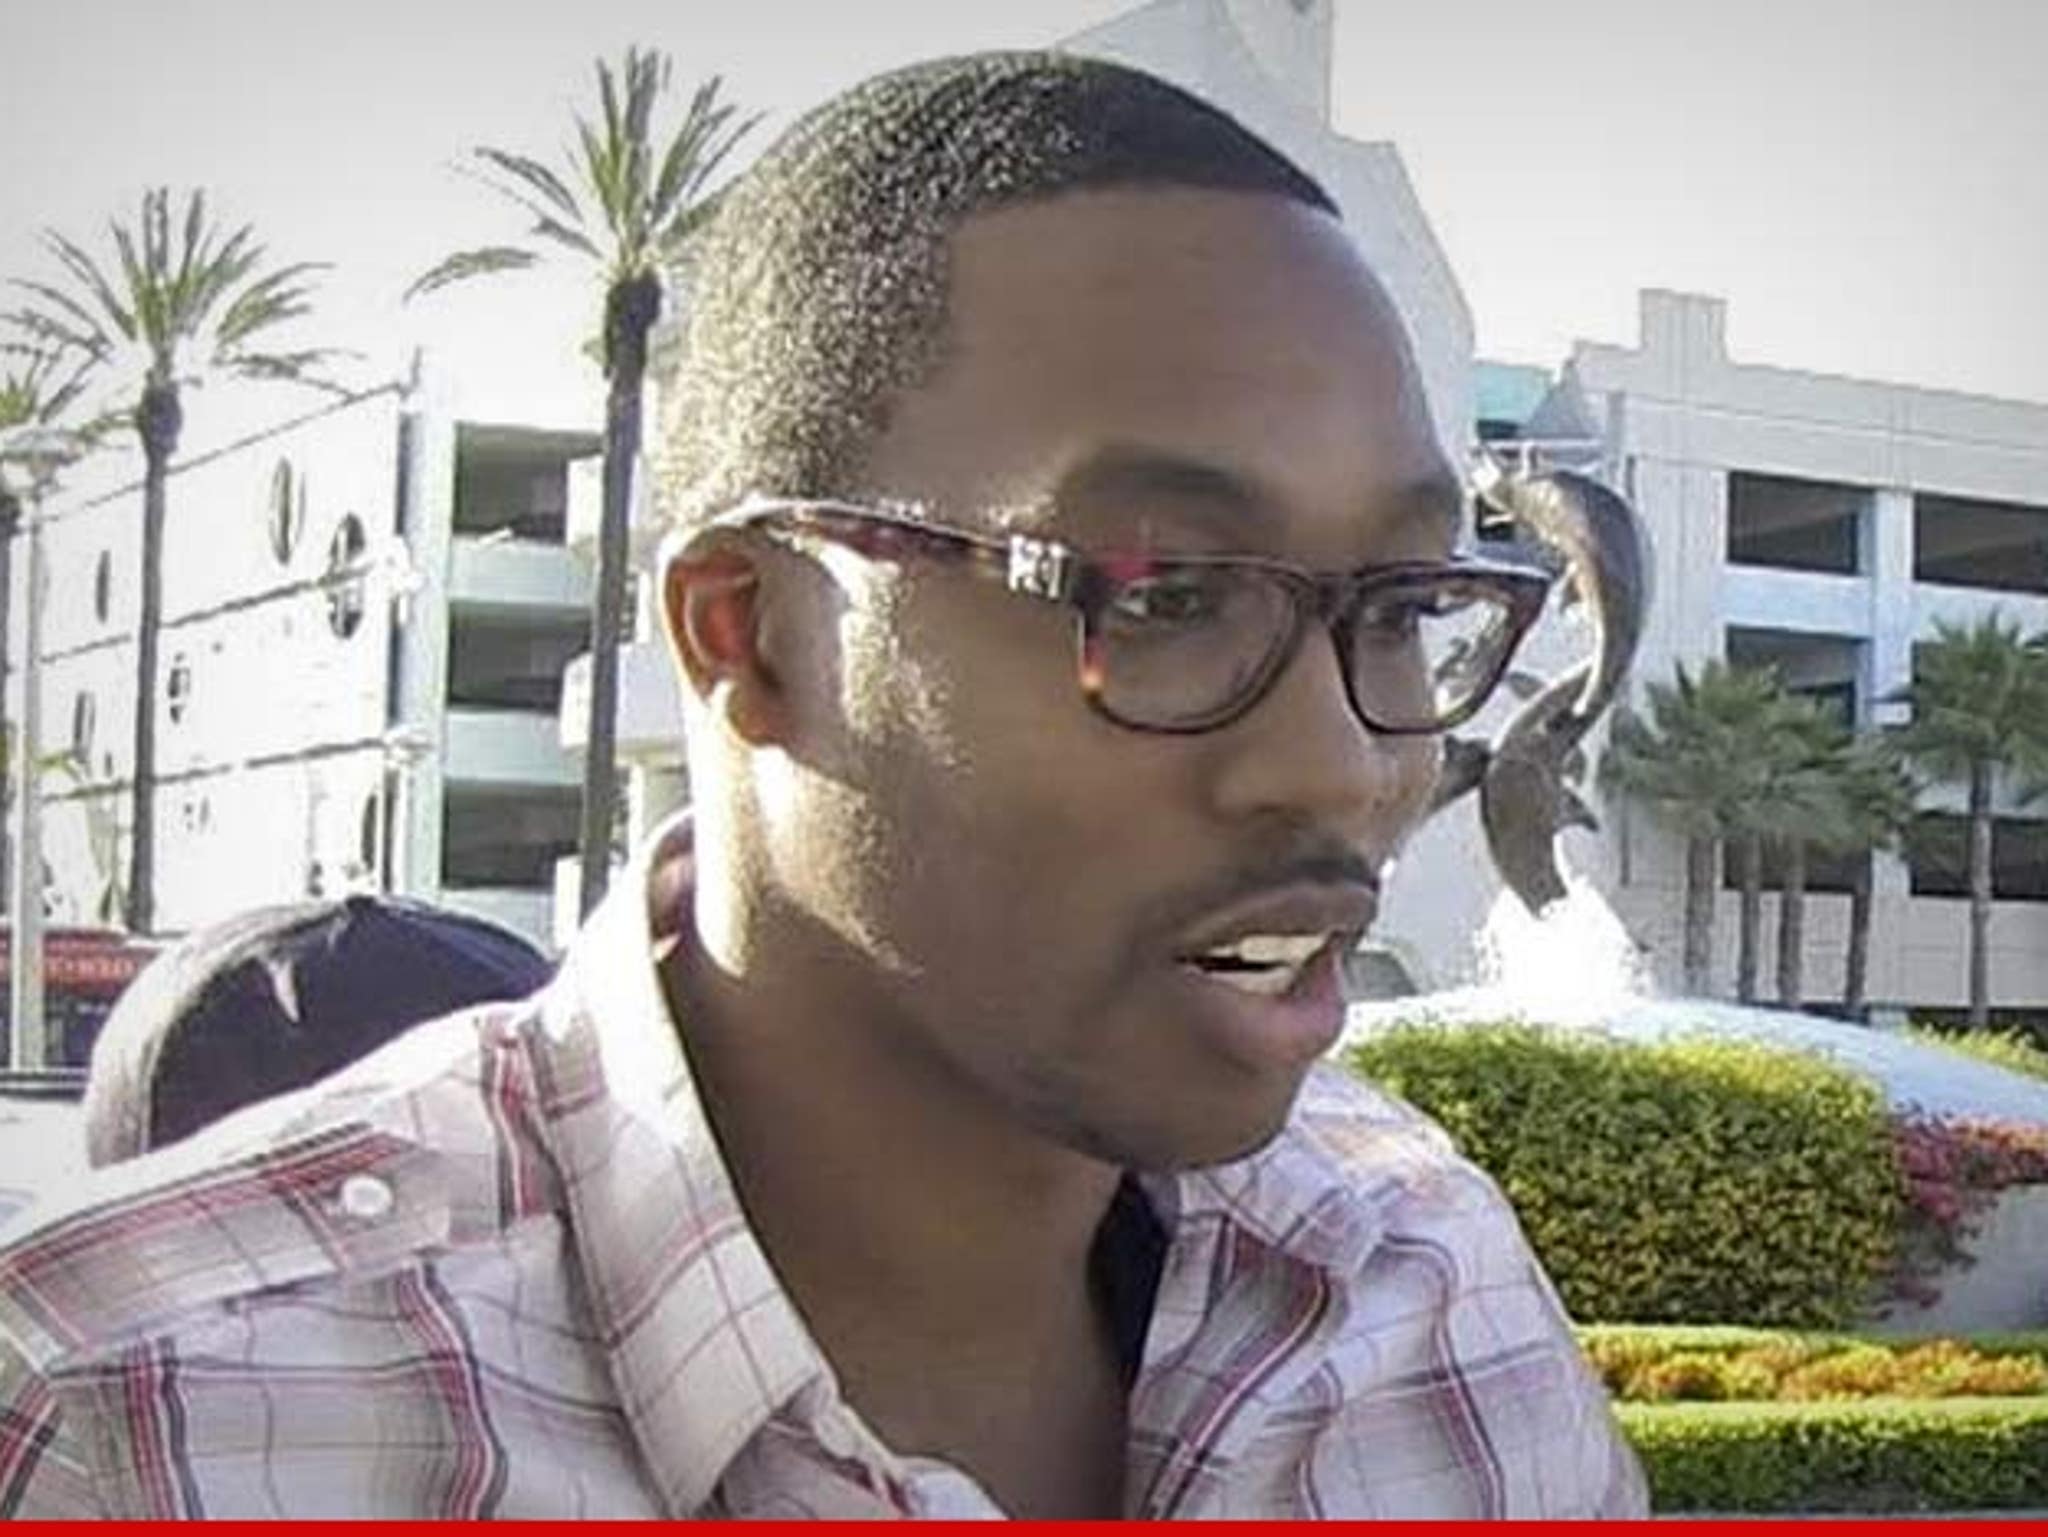 Dwight Howard Disaster Proves You Should Trade Your Babies Young 